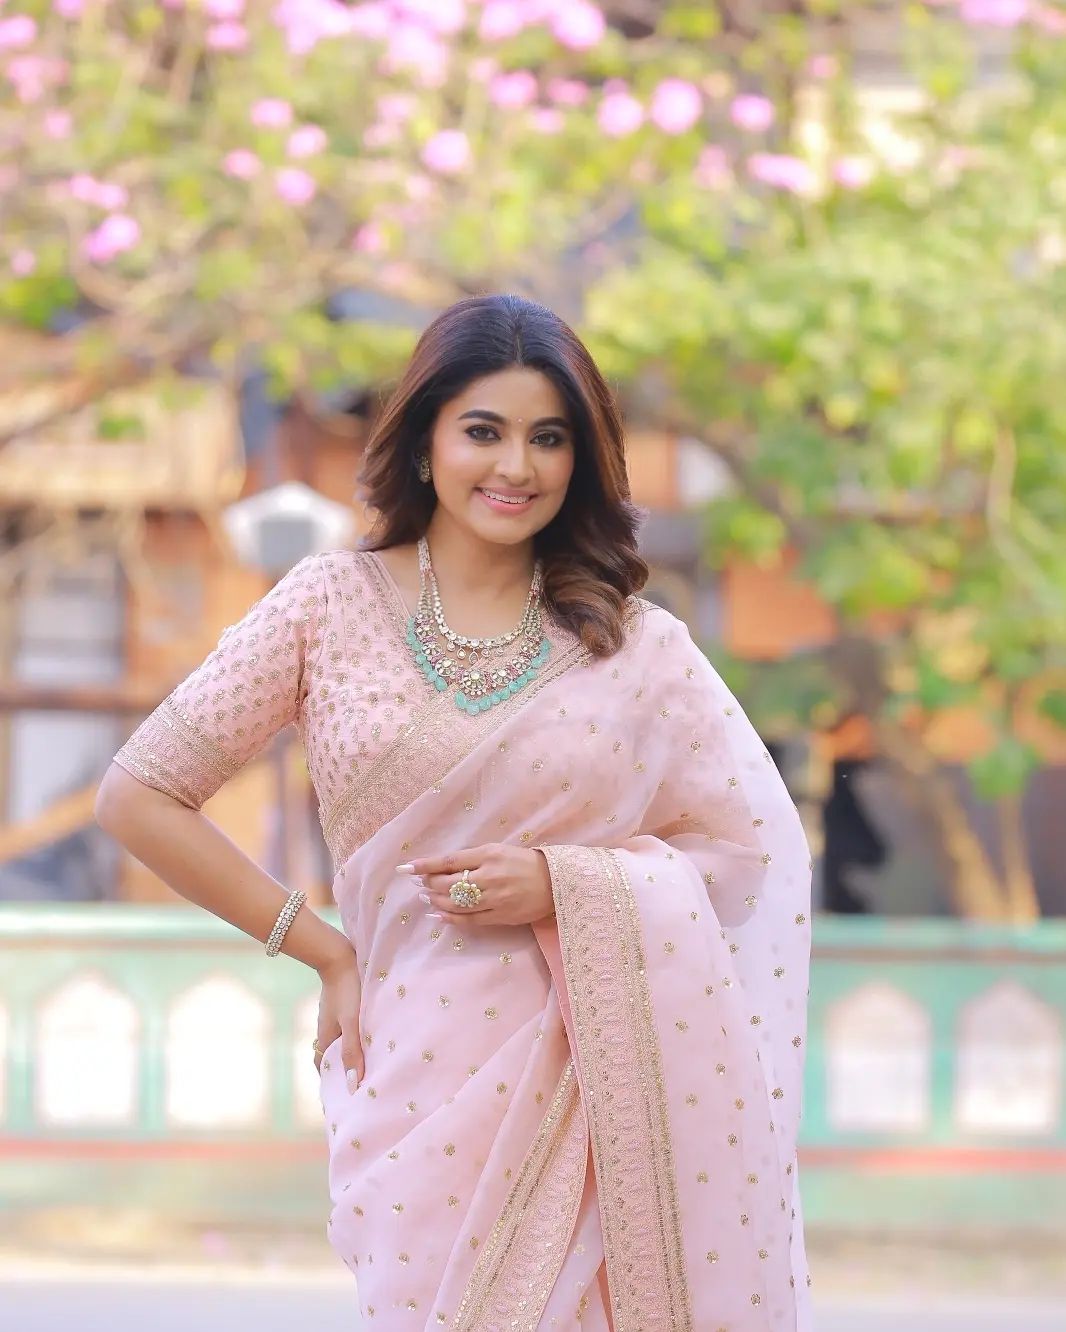 Sneha in Traditional Gold Jewellery - Indian Jewellery Designs